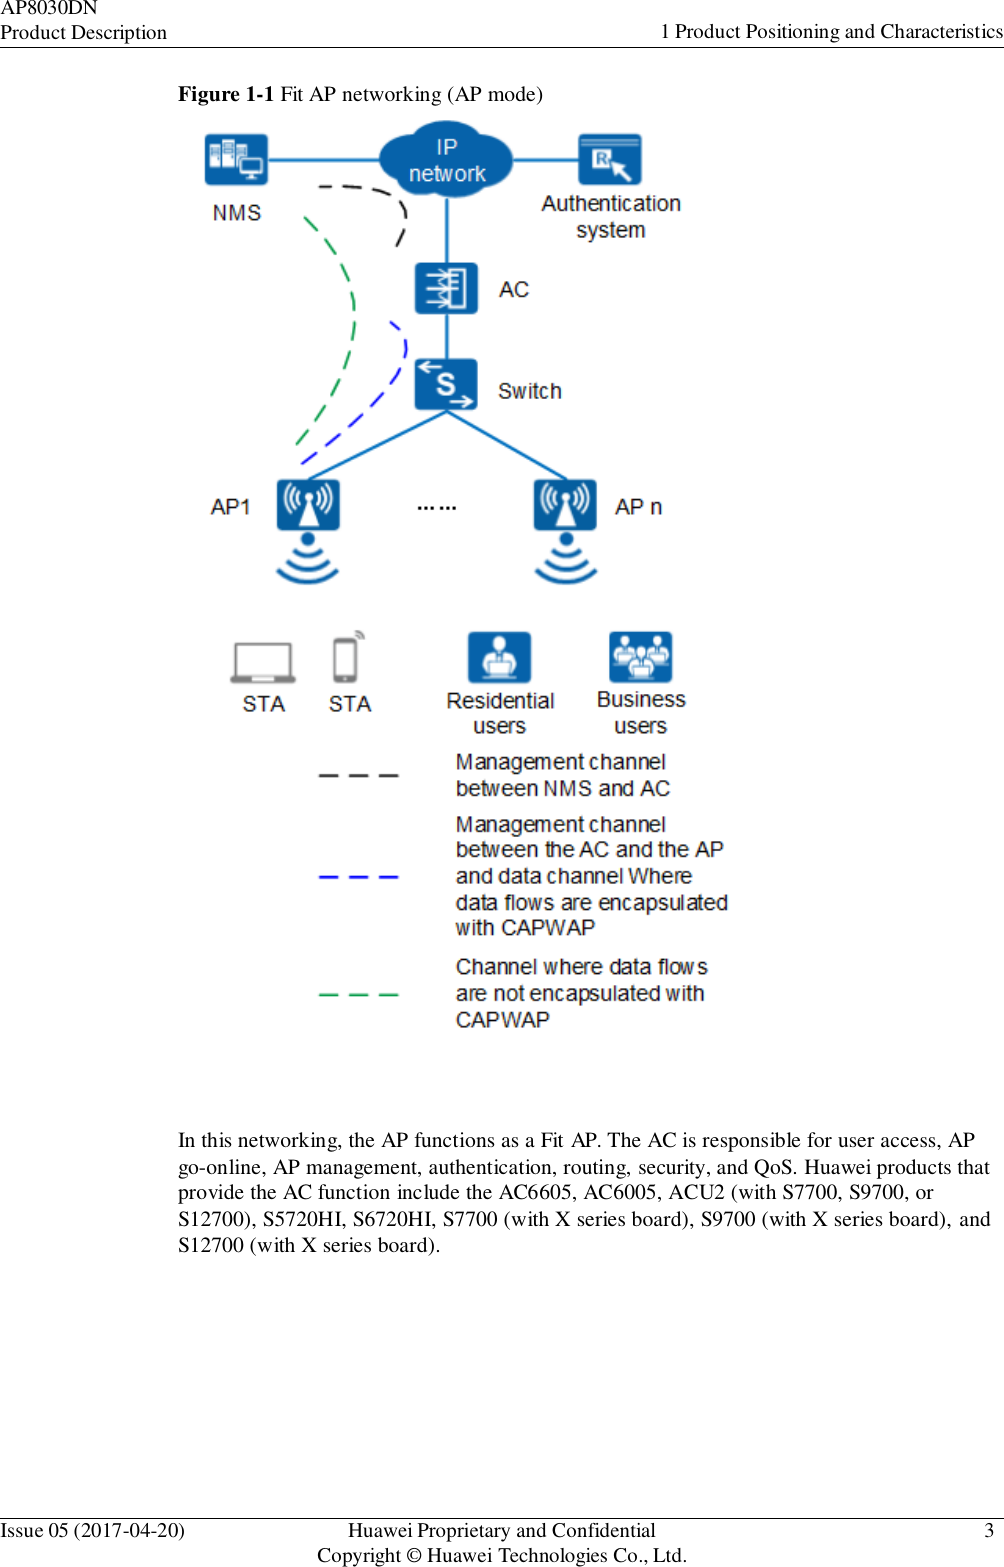 AP8030DN Product Description 1 Product Positioning and Characteristics Issue 05 (2017-04-20) Huawei Proprietary and Confidential Copyright © Huawei Technologies Co., Ltd. 3    Figure 1-1 Fit AP networking (AP mode)      In this networking, the AP functions as a Fit AP. The AC is responsible for user access, AP go-online, AP management, authentication, routing, security, and QoS. Huawei products that provide the AC function include the AC6605, AC6005, ACU2 (with S7700, S9700, or S12700), S5720HI, S6720HI, S7700 (with X series board), S9700 (with X series board), and S12700 (with X series board).